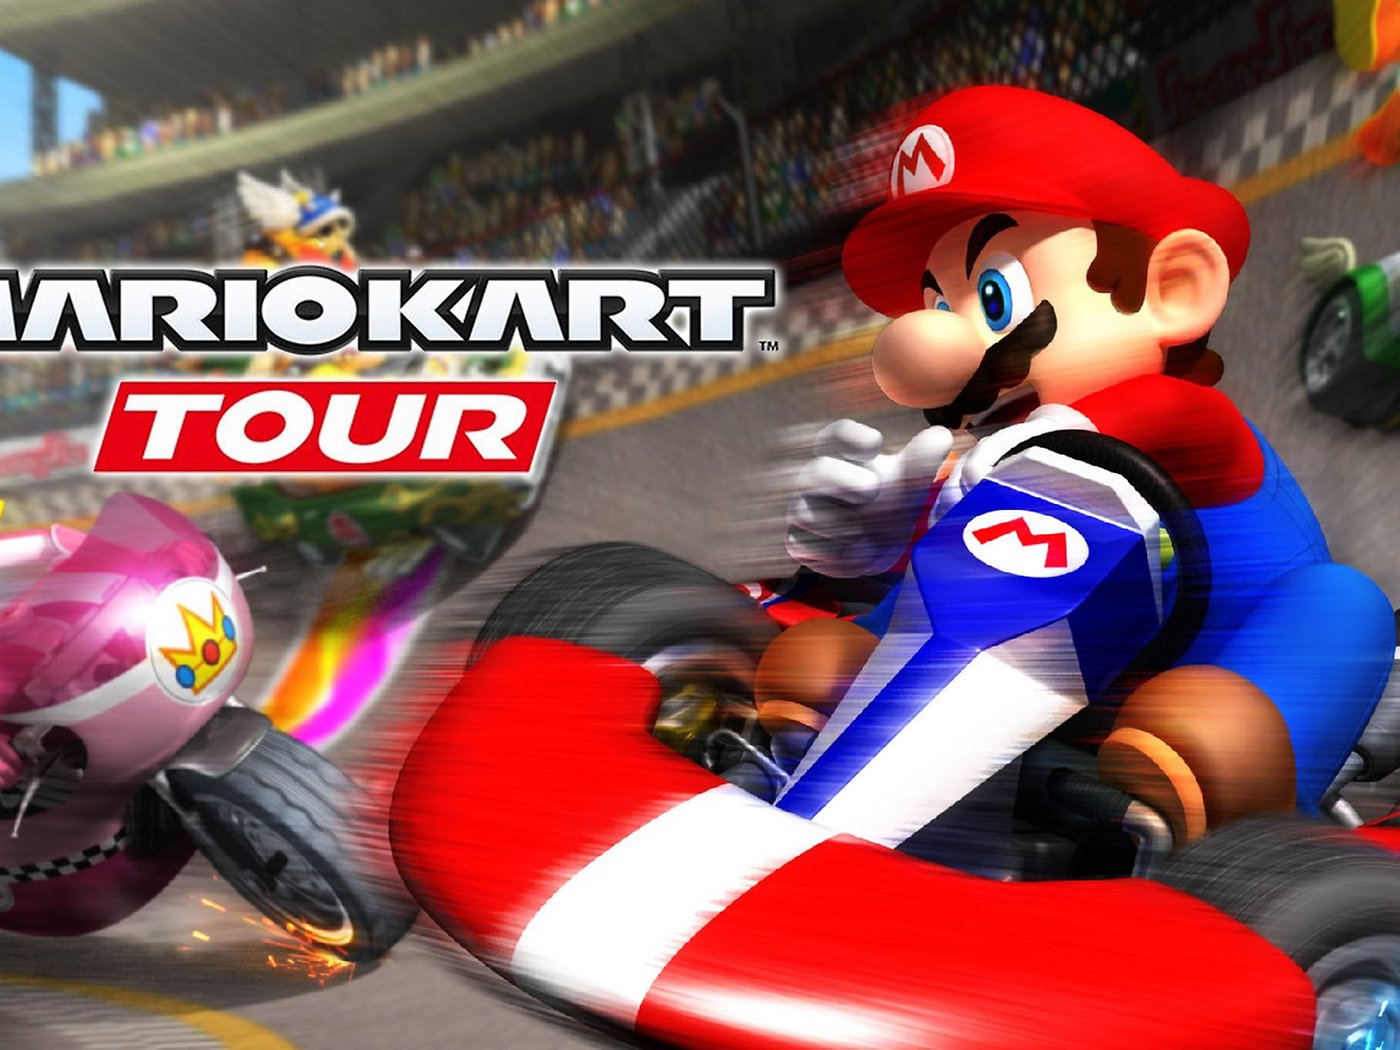 Mario Kart Tour' Now Available for iPhone and iPad